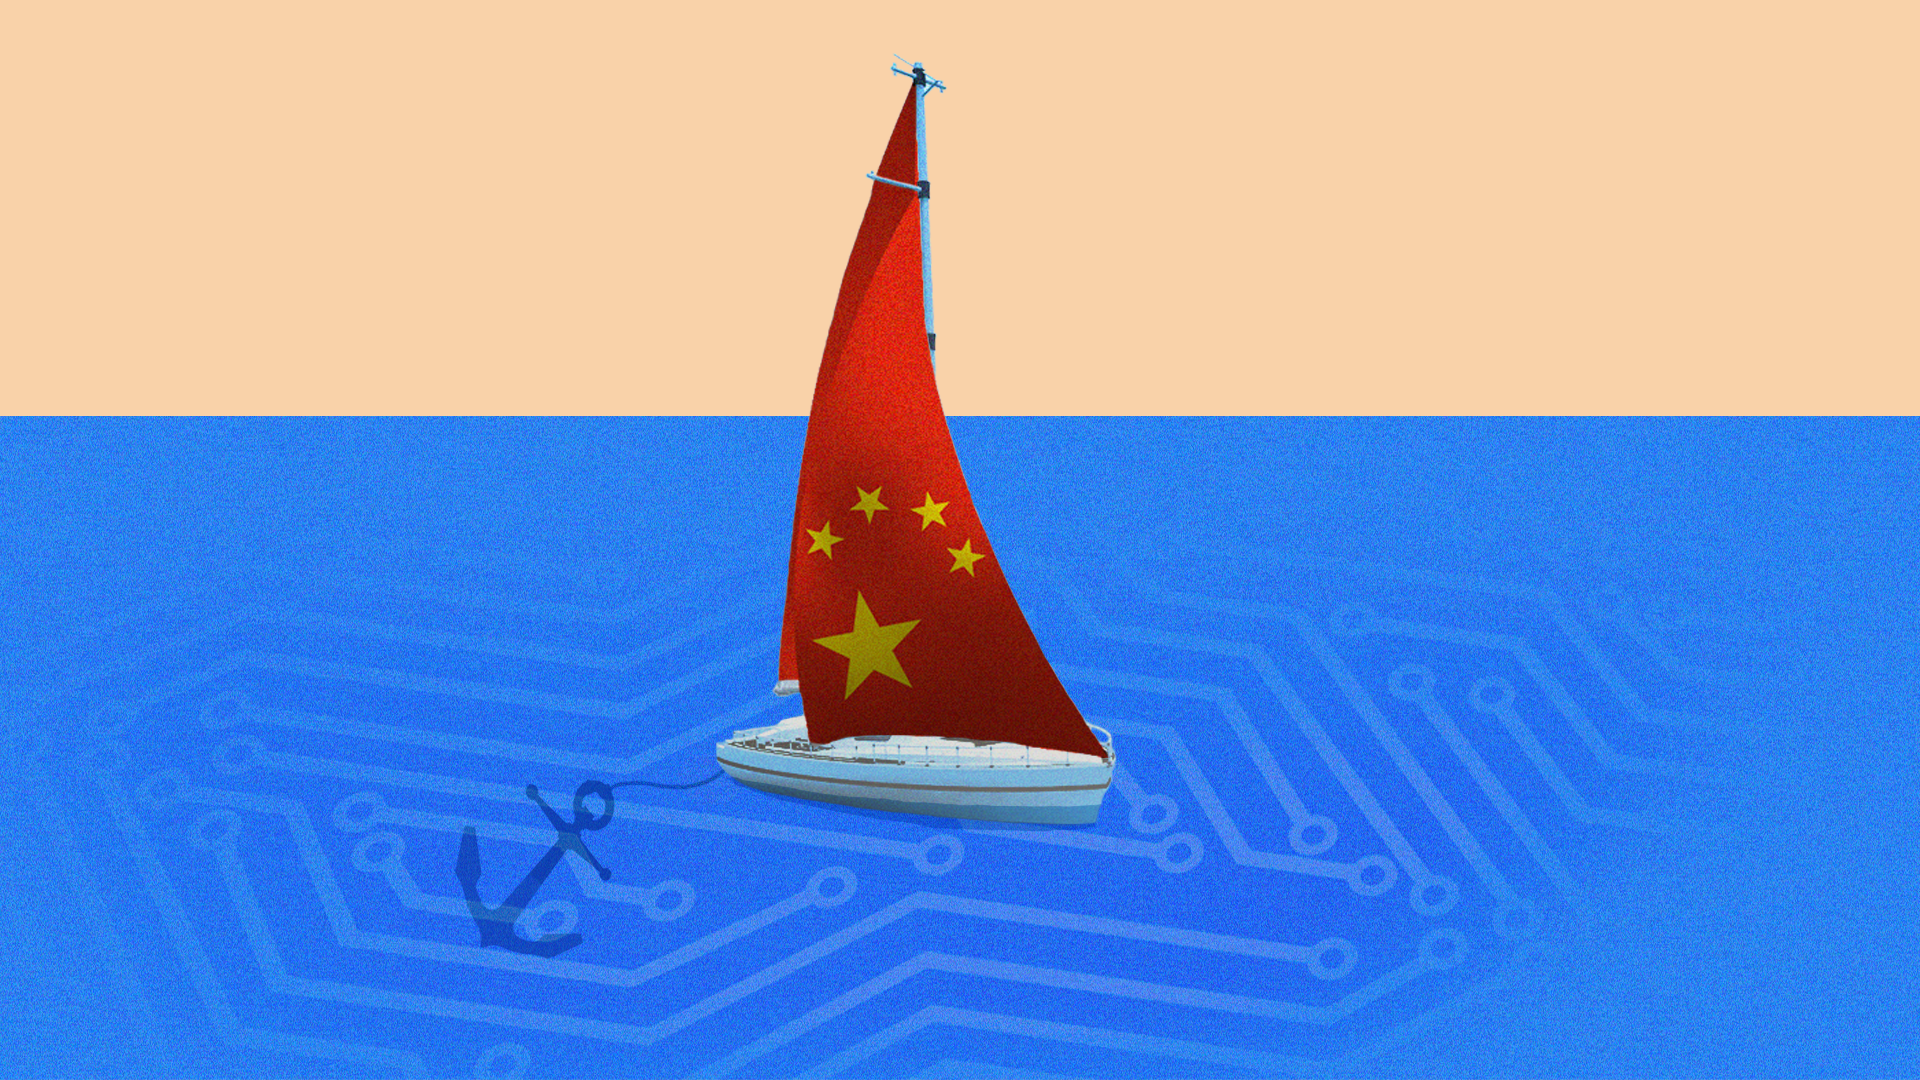 A boat with a Chinese flag as a sail